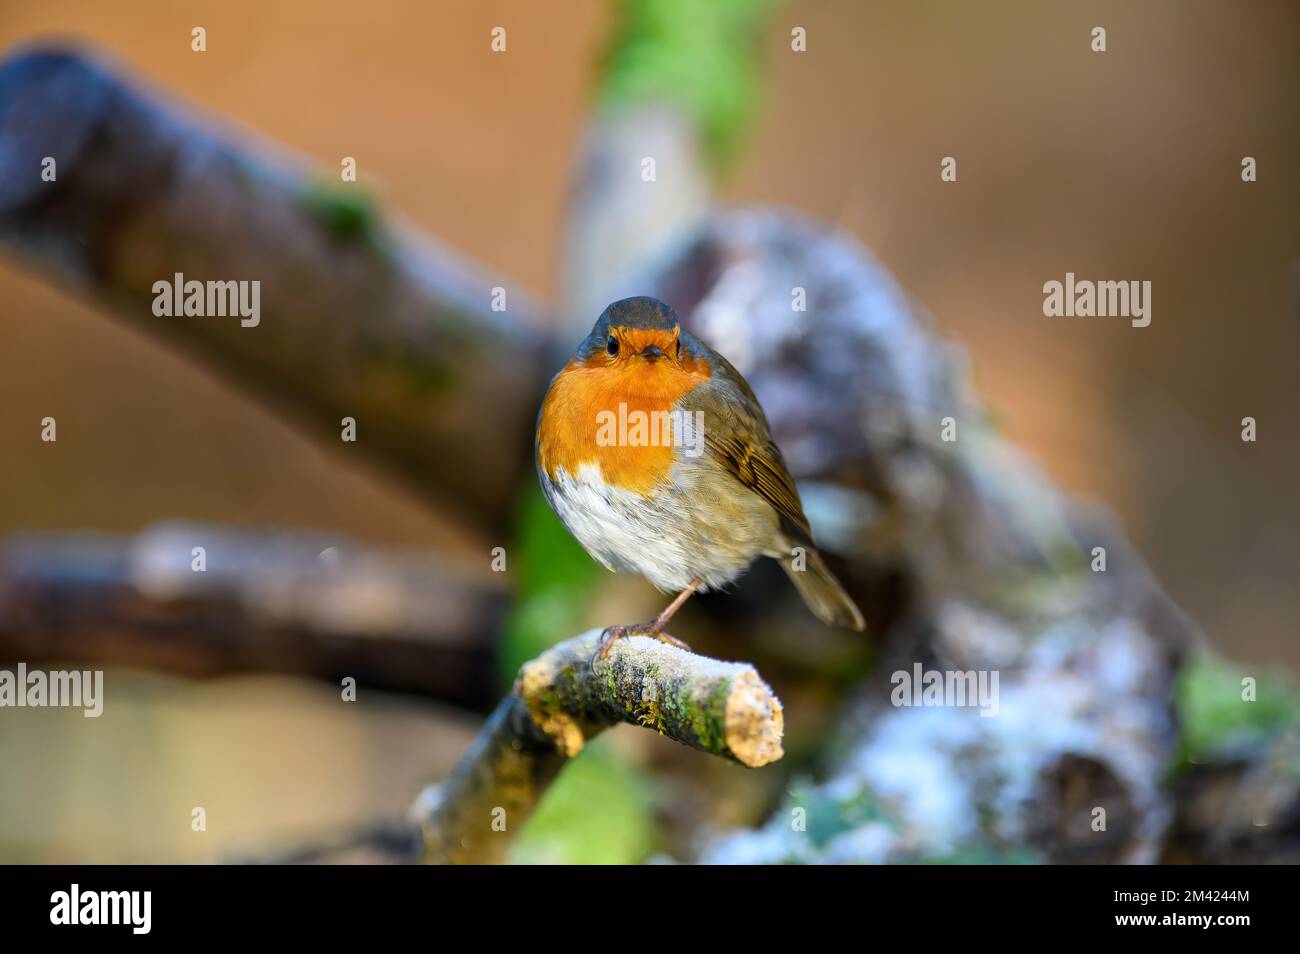 Robin, Erithacus rubecula, perched on a branch, looking ahead Stock Photo